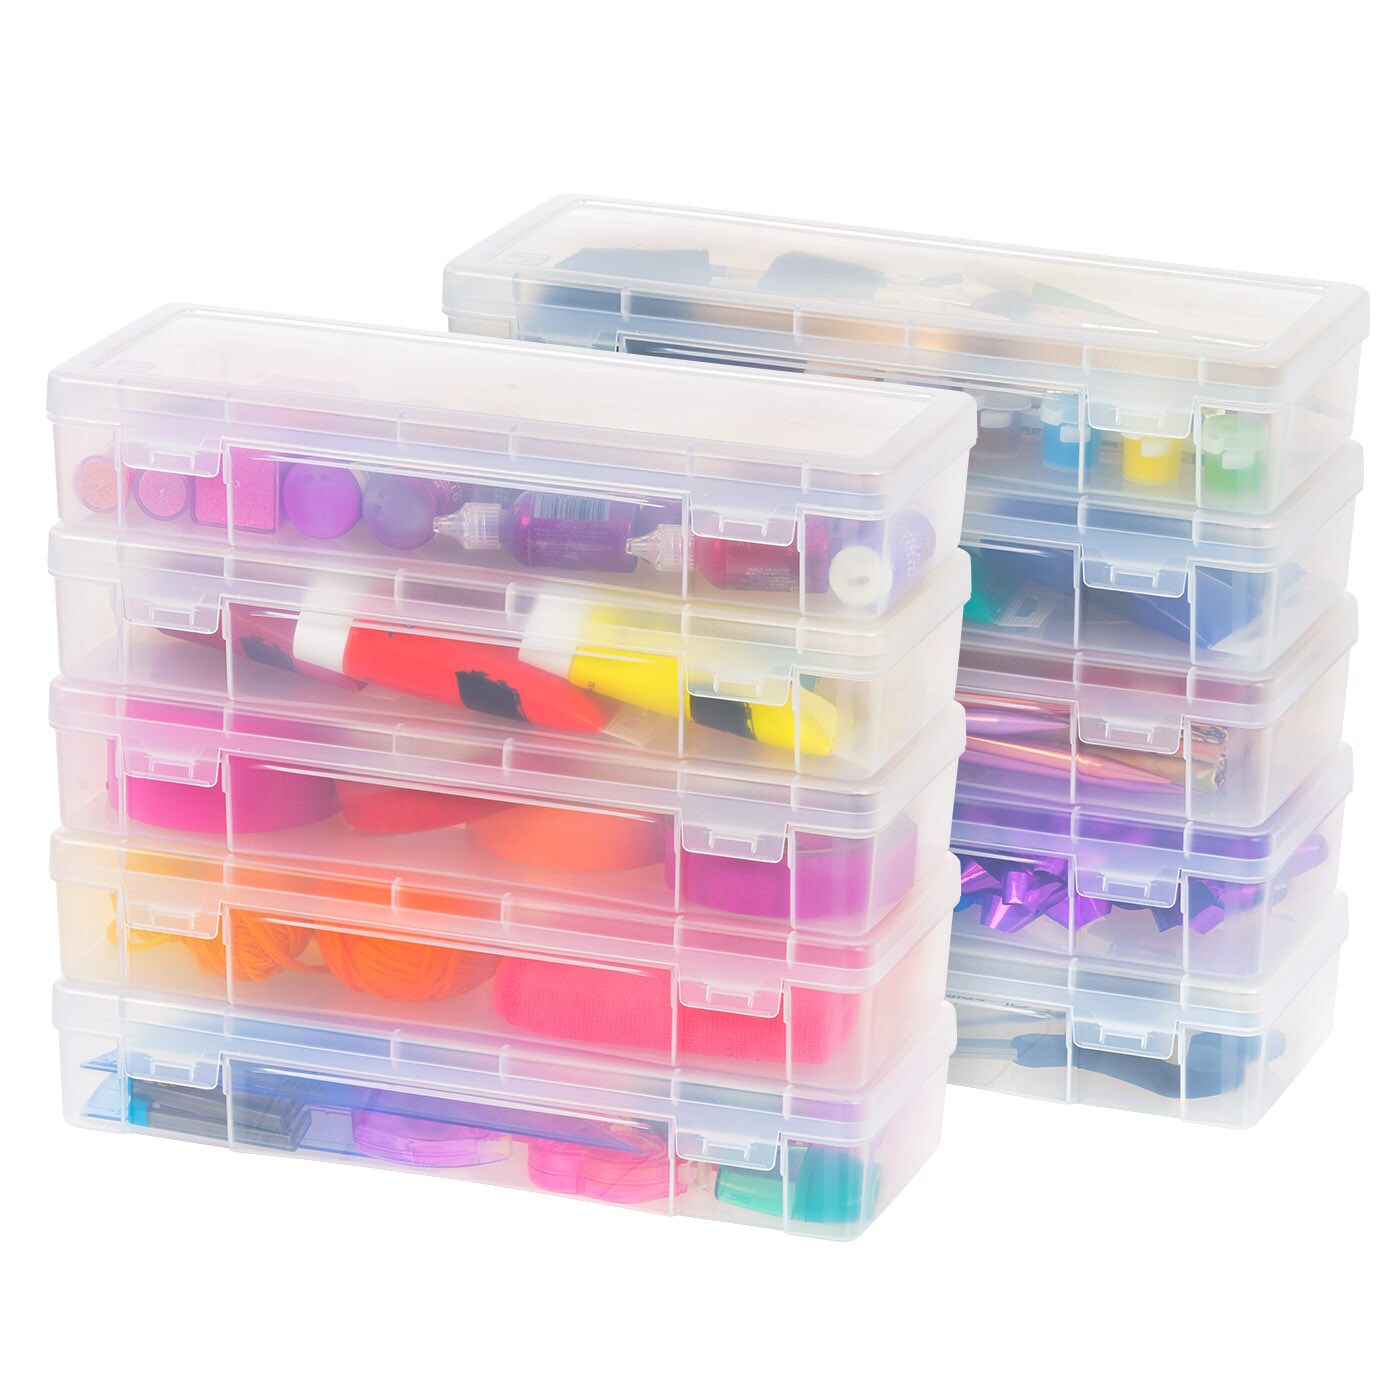 IRIS USA 10Pack 8.5 x 11 Portable Project Case Container with Snap-Tight  Latch, Clear, 10 Units - Harris Teeter